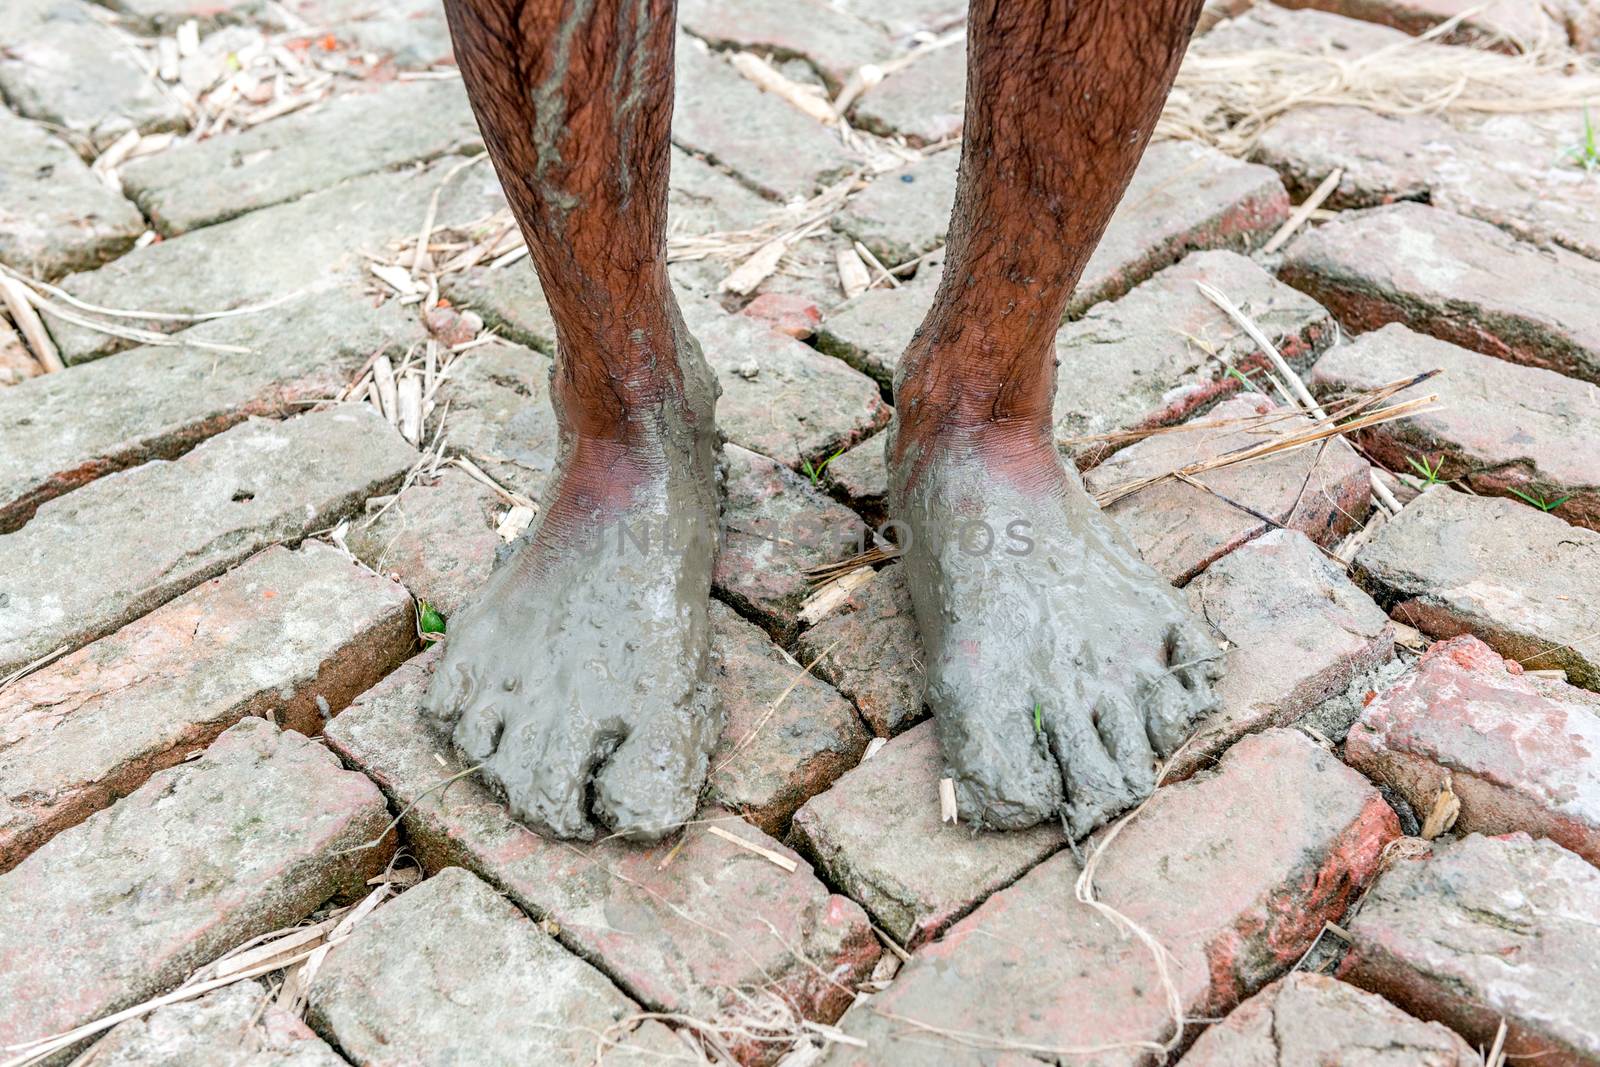 Legs of a labor with muddy by sohel.parvez@hotmail.com